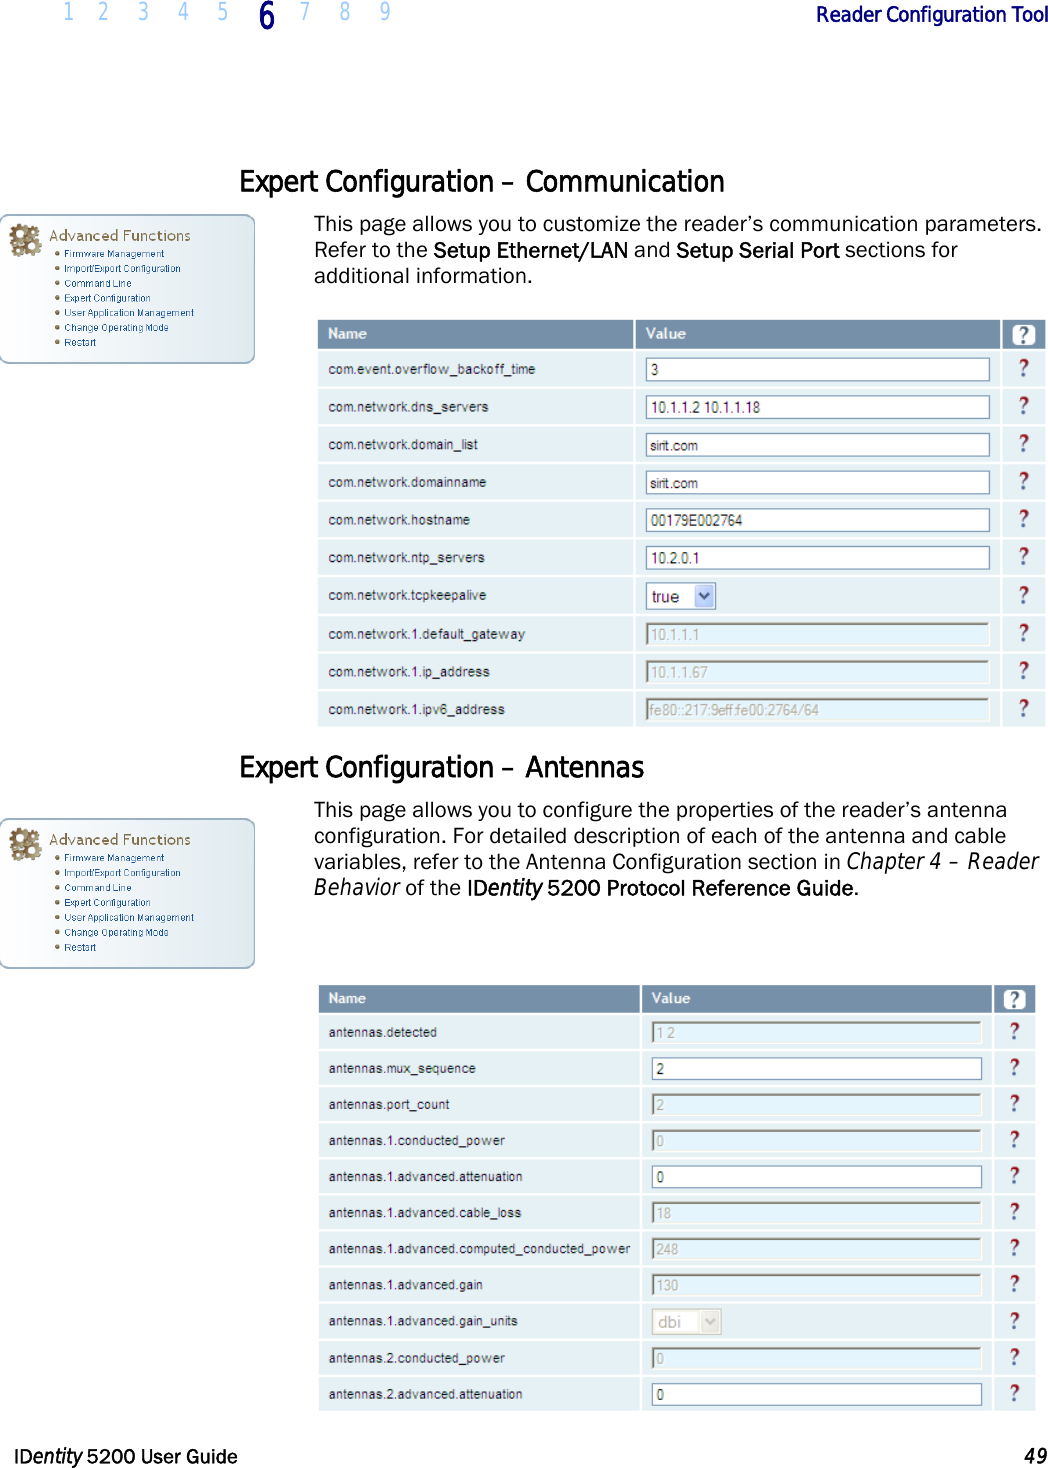  1 2 3 4 5 6 7 8 9       Reader Configuration Tool   IDentity 5200 User Guide  49  Expert Configuration – Communication This page allows you to customize the reader’s communication parameters. Refer to the Setup Ethernet/LAN and Setup Serial Port sections for additional information.  Expert Configuration – Antennas This page allows you to configure the properties of the reader’s antenna configuration. For detailed description of each of the antenna and cable variables, refer to the Antenna Configuration section in Chapter 4 – Reader Behavior of the IDentity 5200 Protocol Reference Guide.    